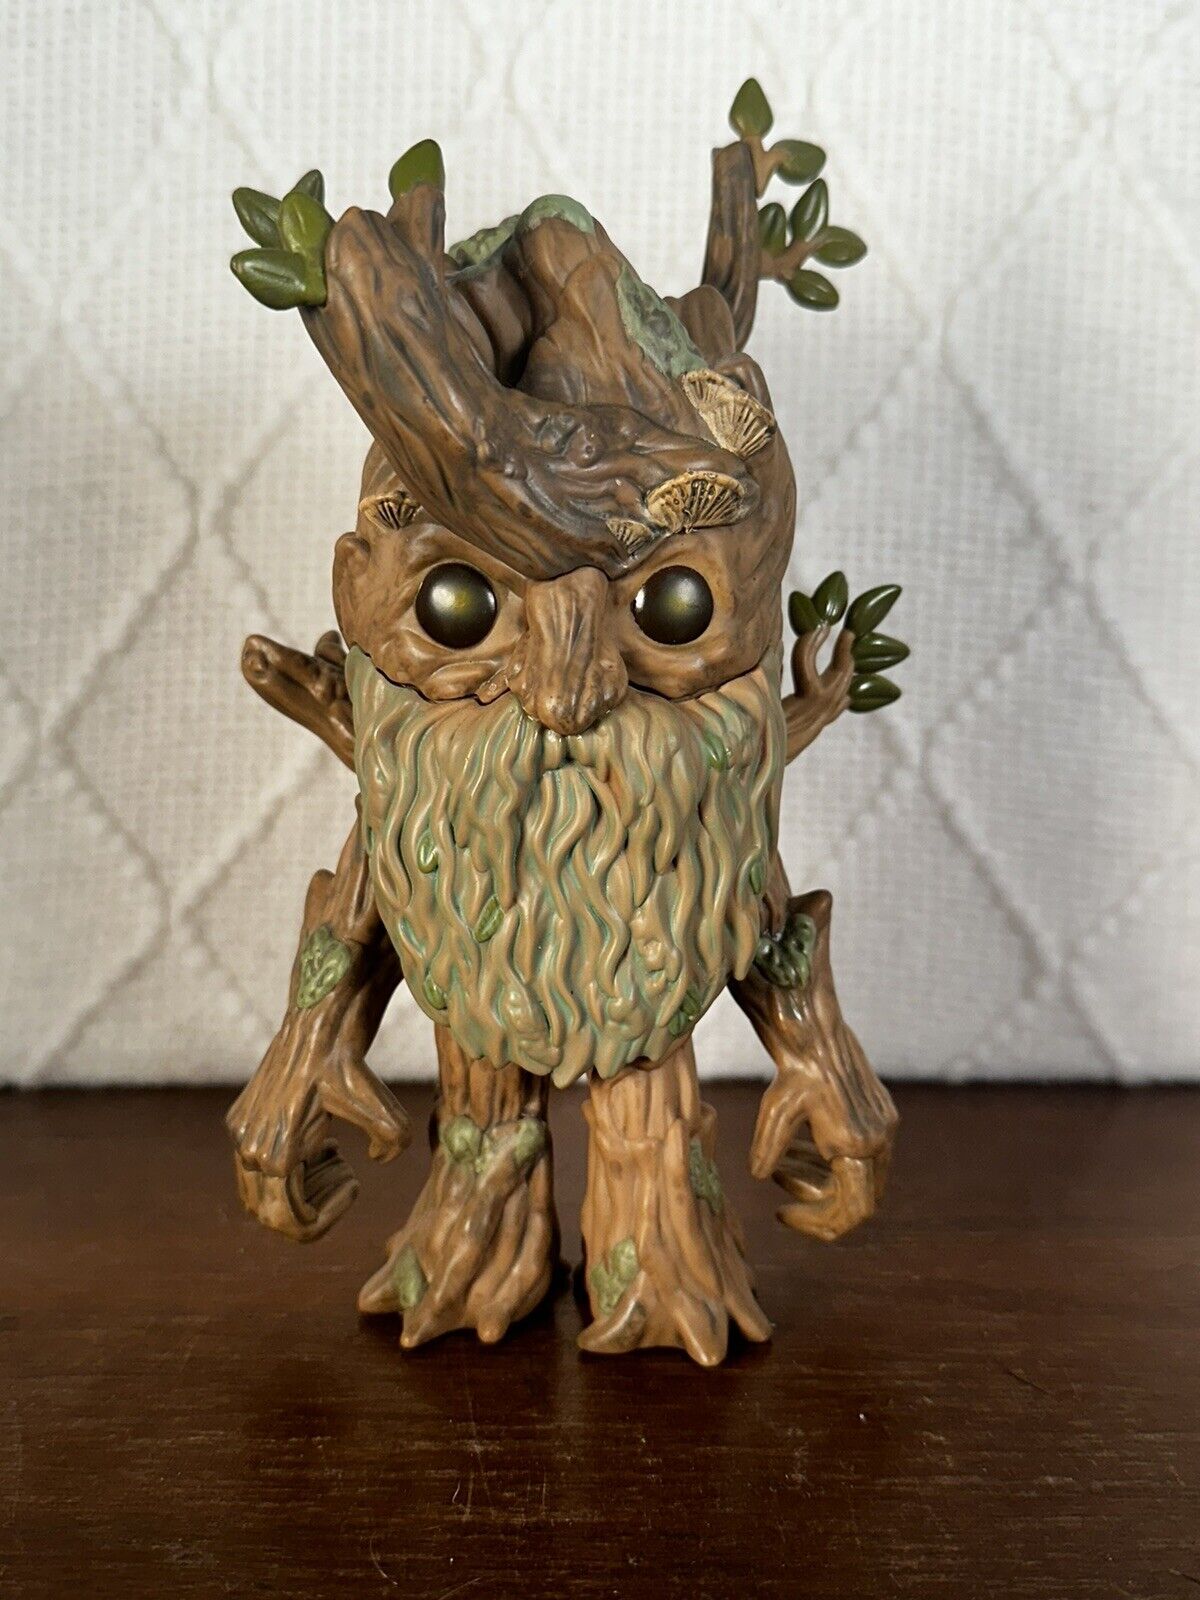 Funko Pop The Lord of The Rings #529 Treebeard - Out of Box No Box, Loose